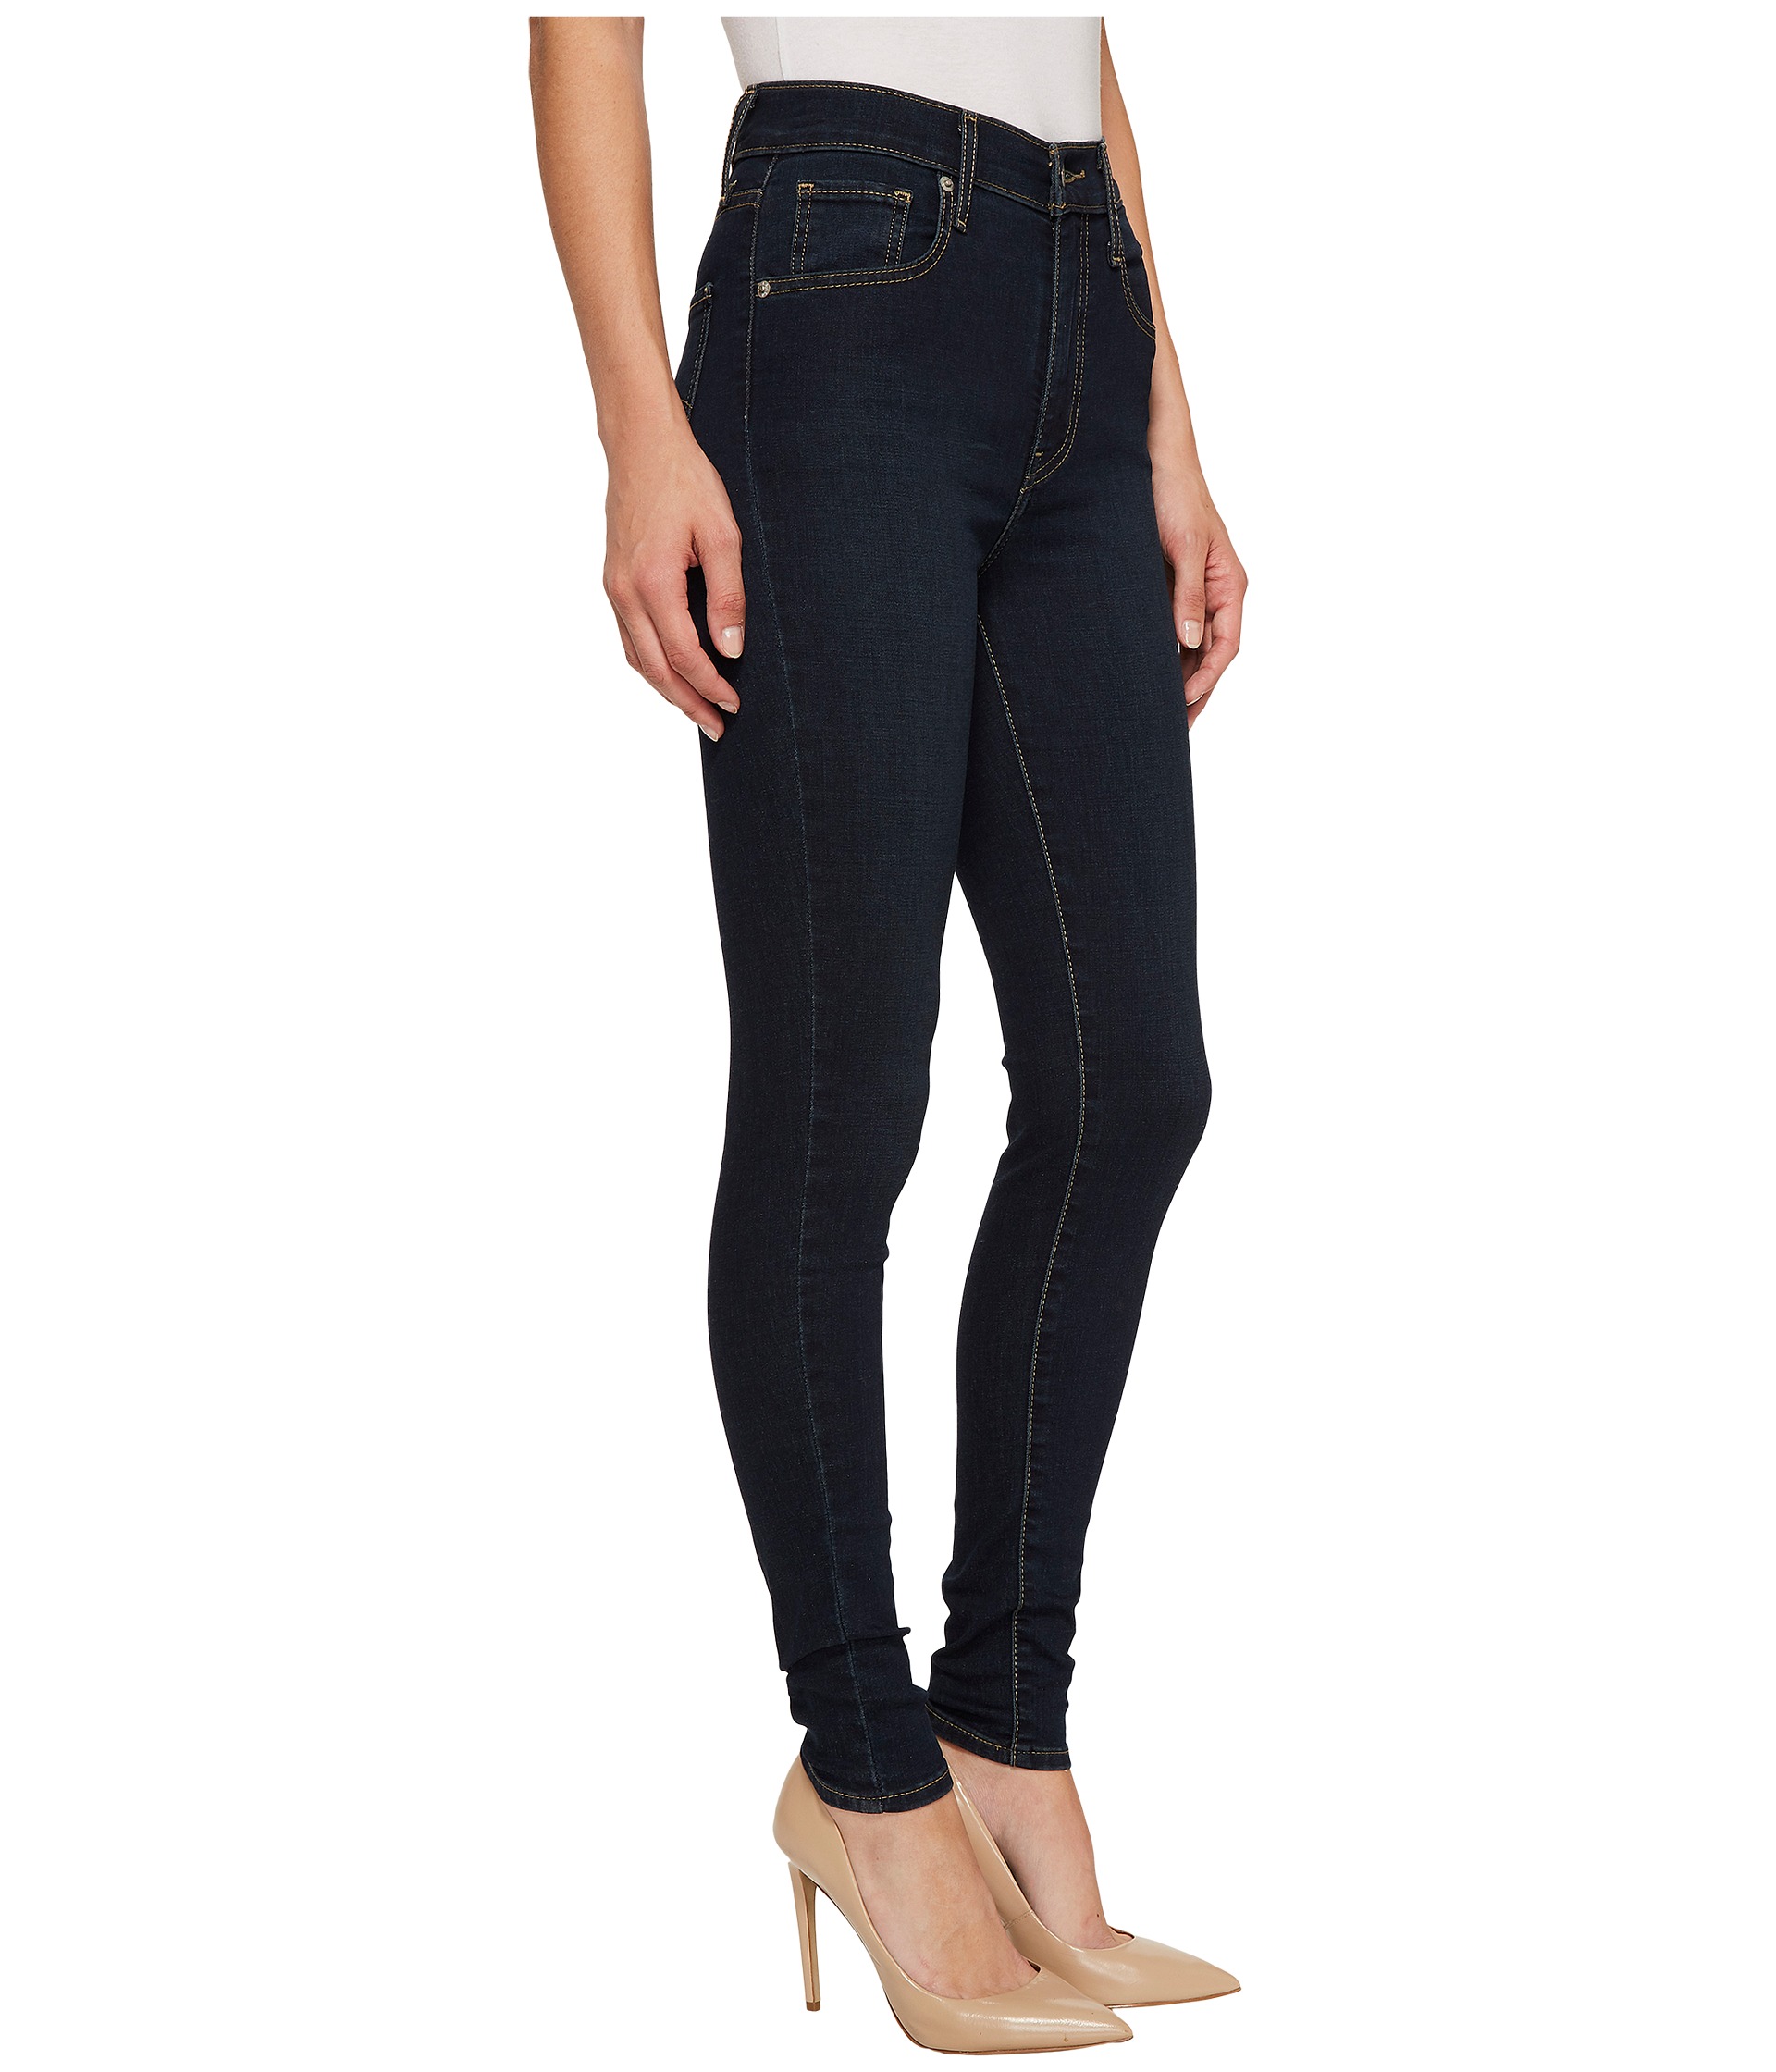 Levi's® Womens Mile High Super Skinny at Zappos.com